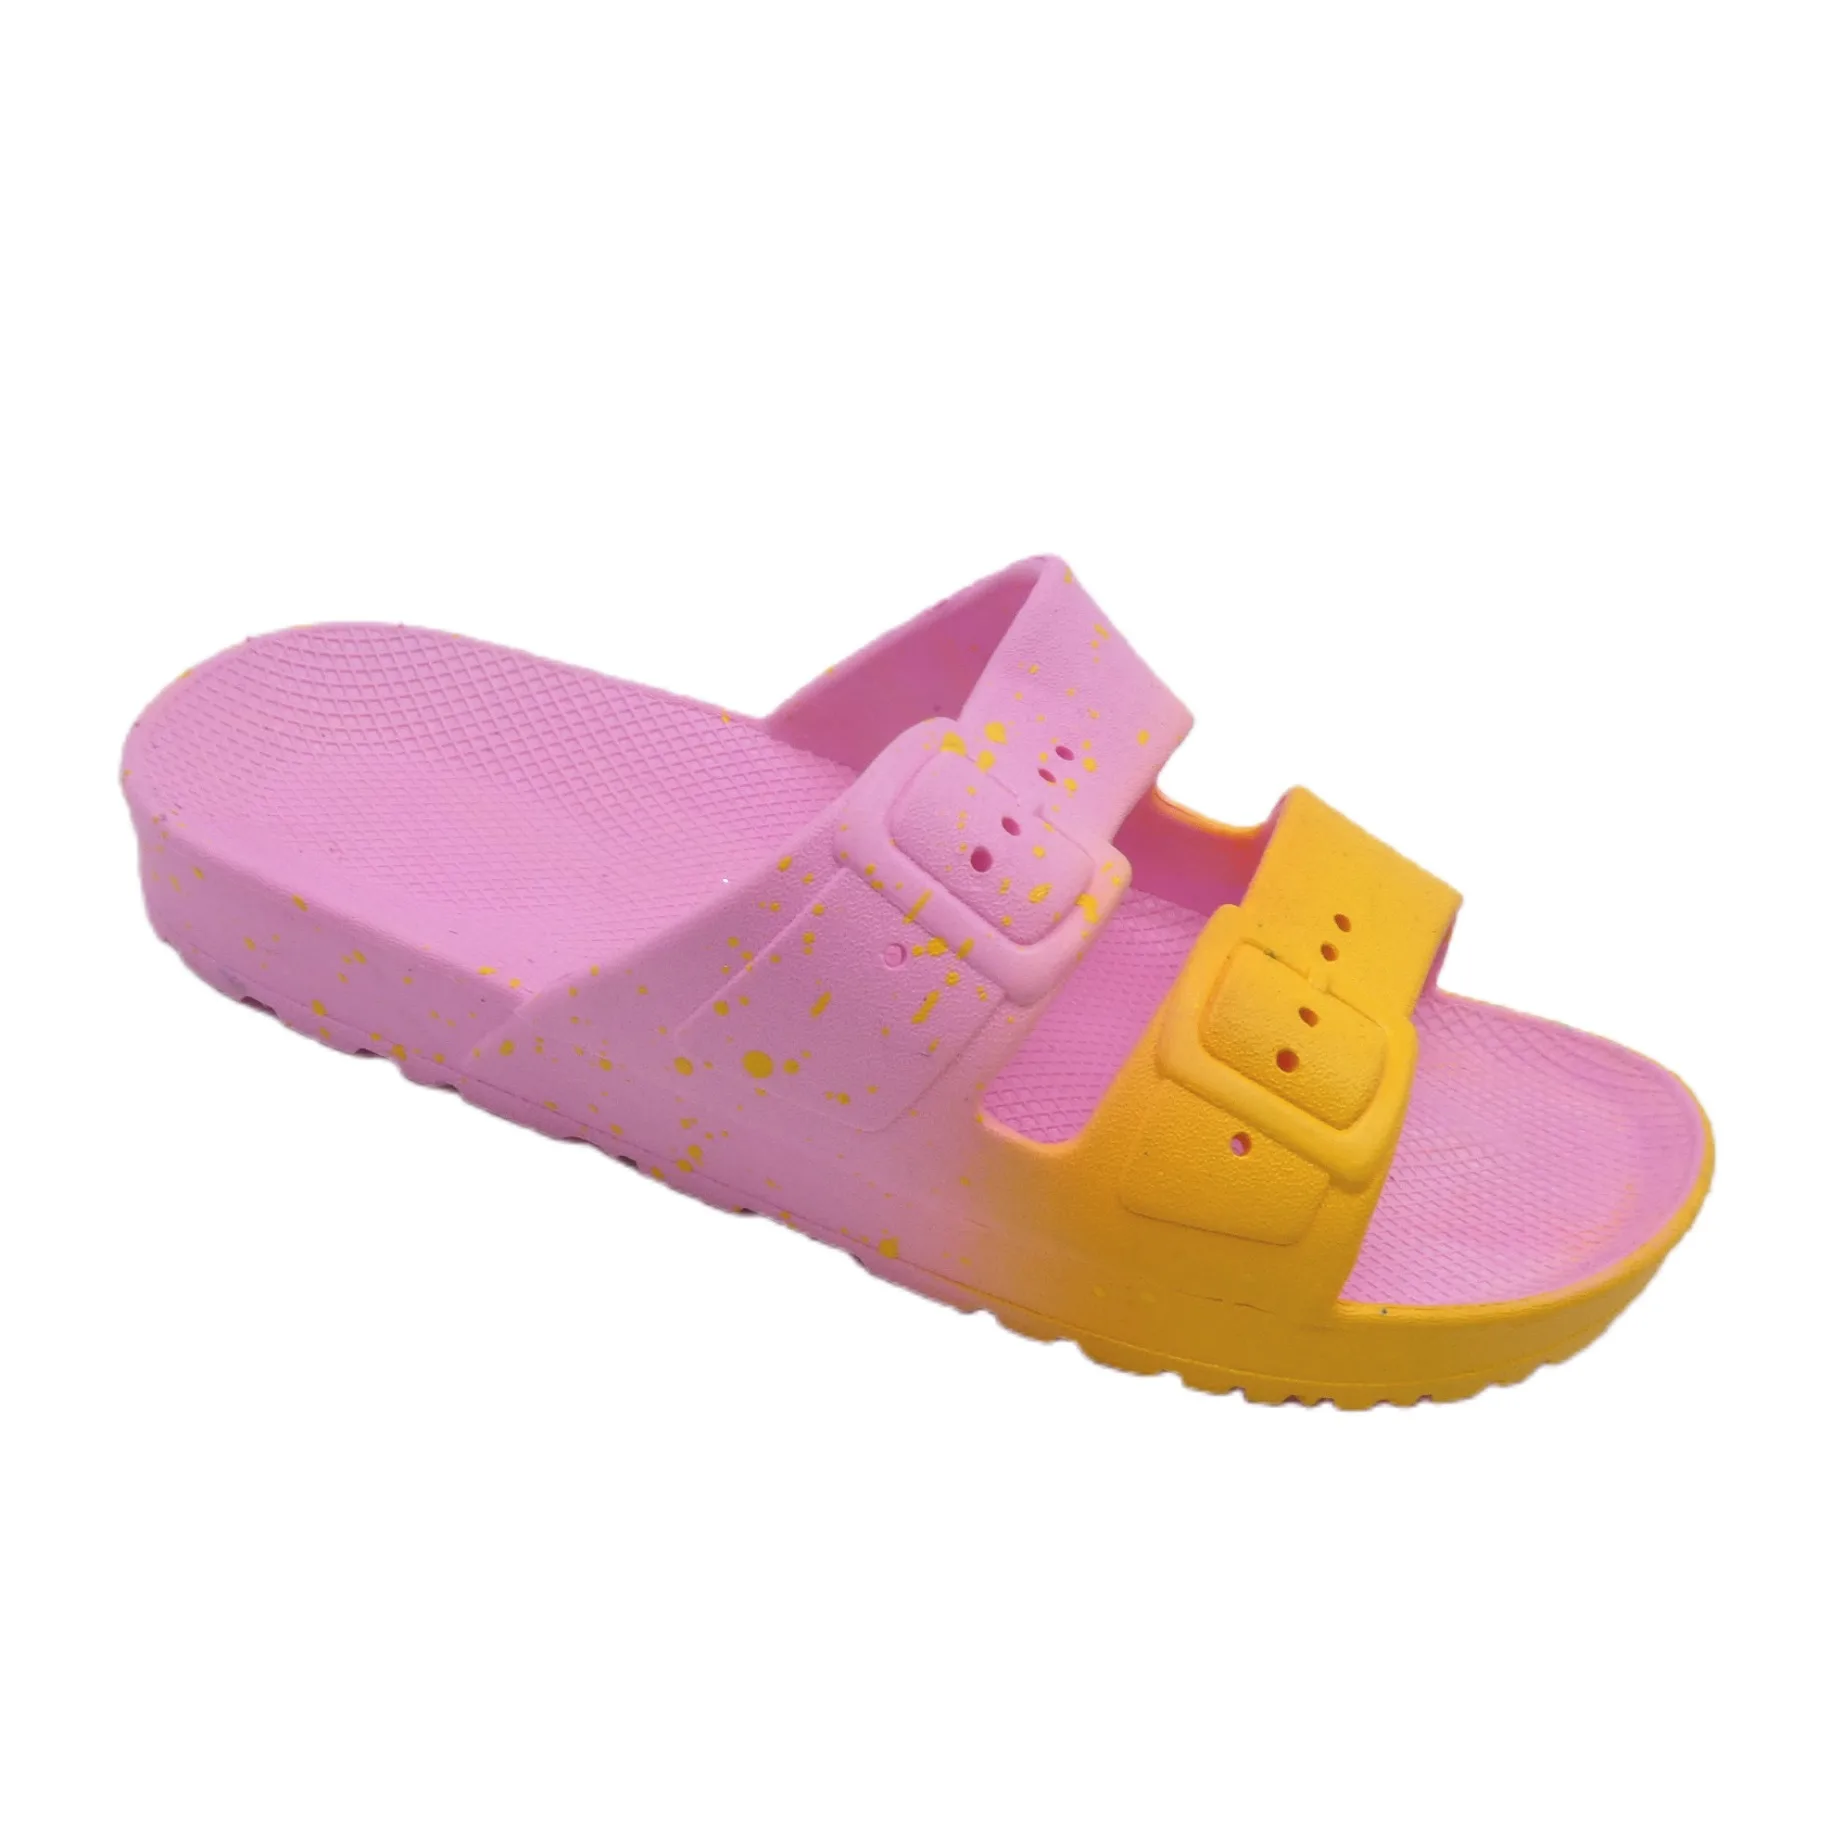 2023 Eva Slippers Sandals Outdoor Double Buckle With Thick Sole ...